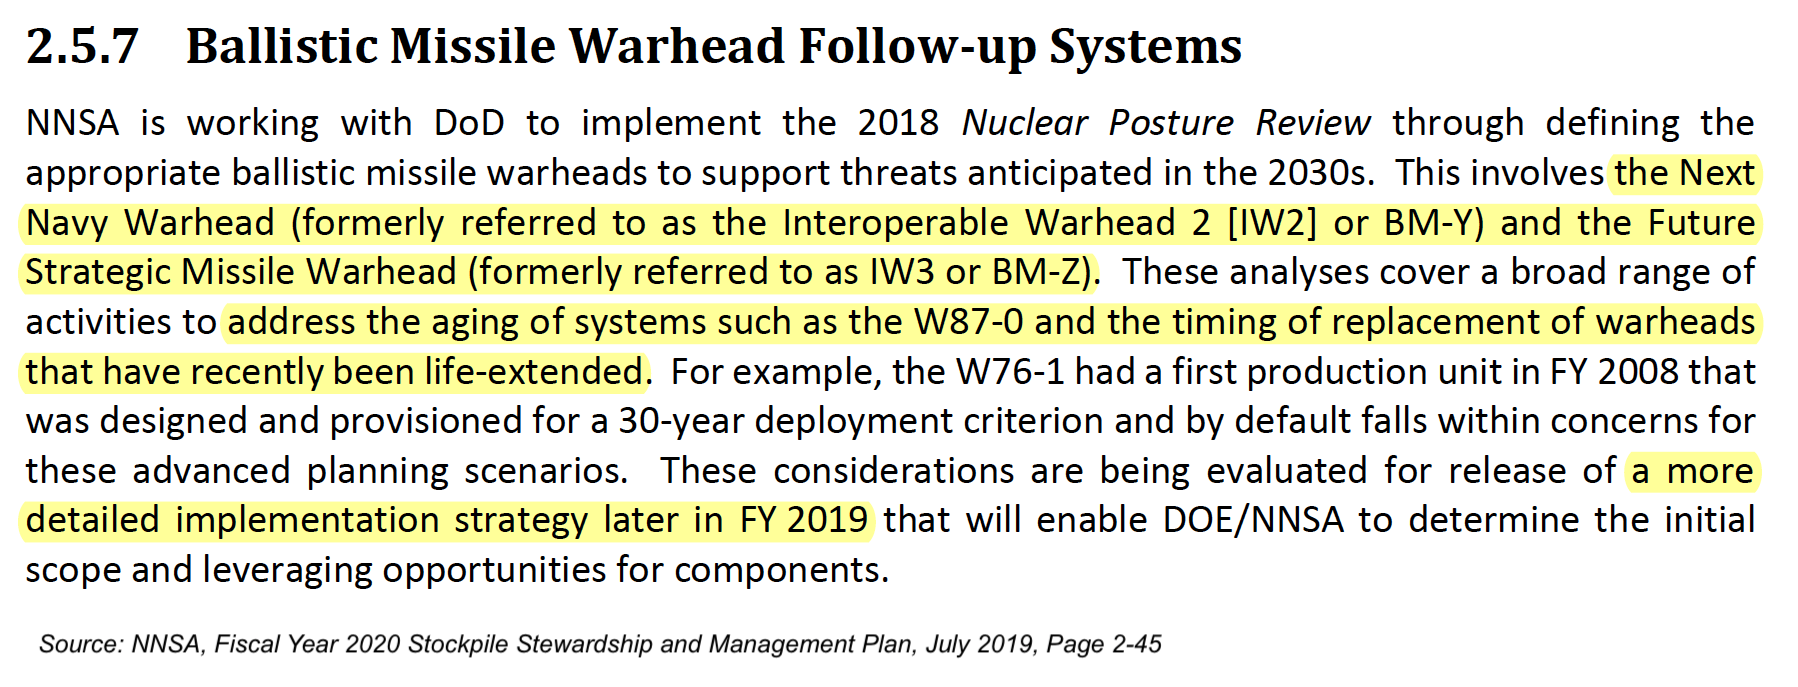 Hans Kristensen on X: Timelines indicate the new W93 warhead fits what  used to be called the Interoperable Warhead-2 (IW-2) and later the “Next  Navy Warhead.” But new designation indicates something more